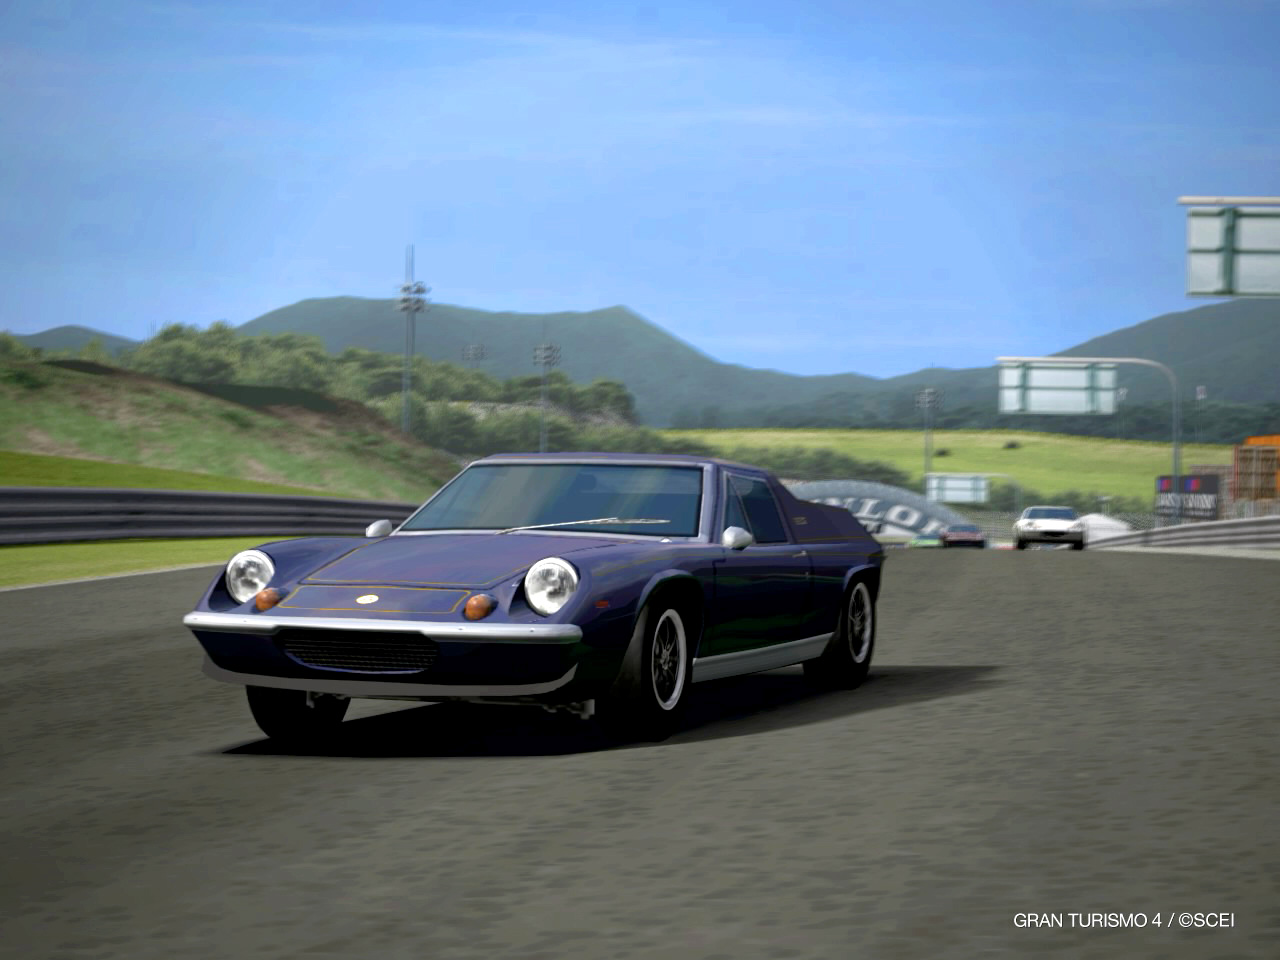 Lotus europa special. Best photos and information of modification.